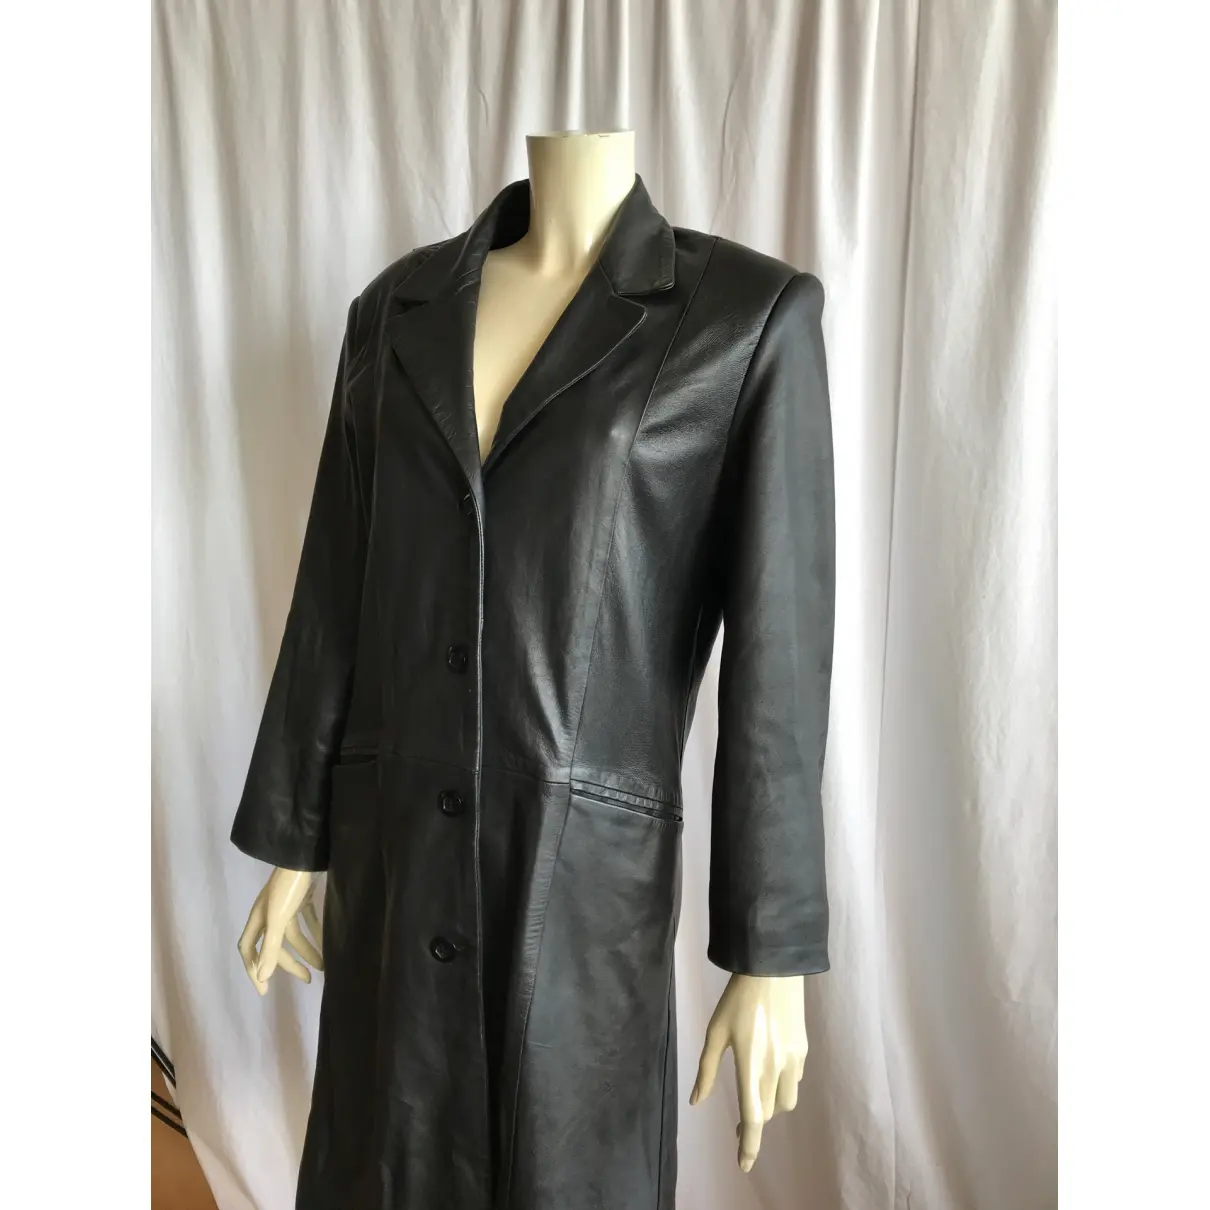 Buy Bugatti Leather trench coat online